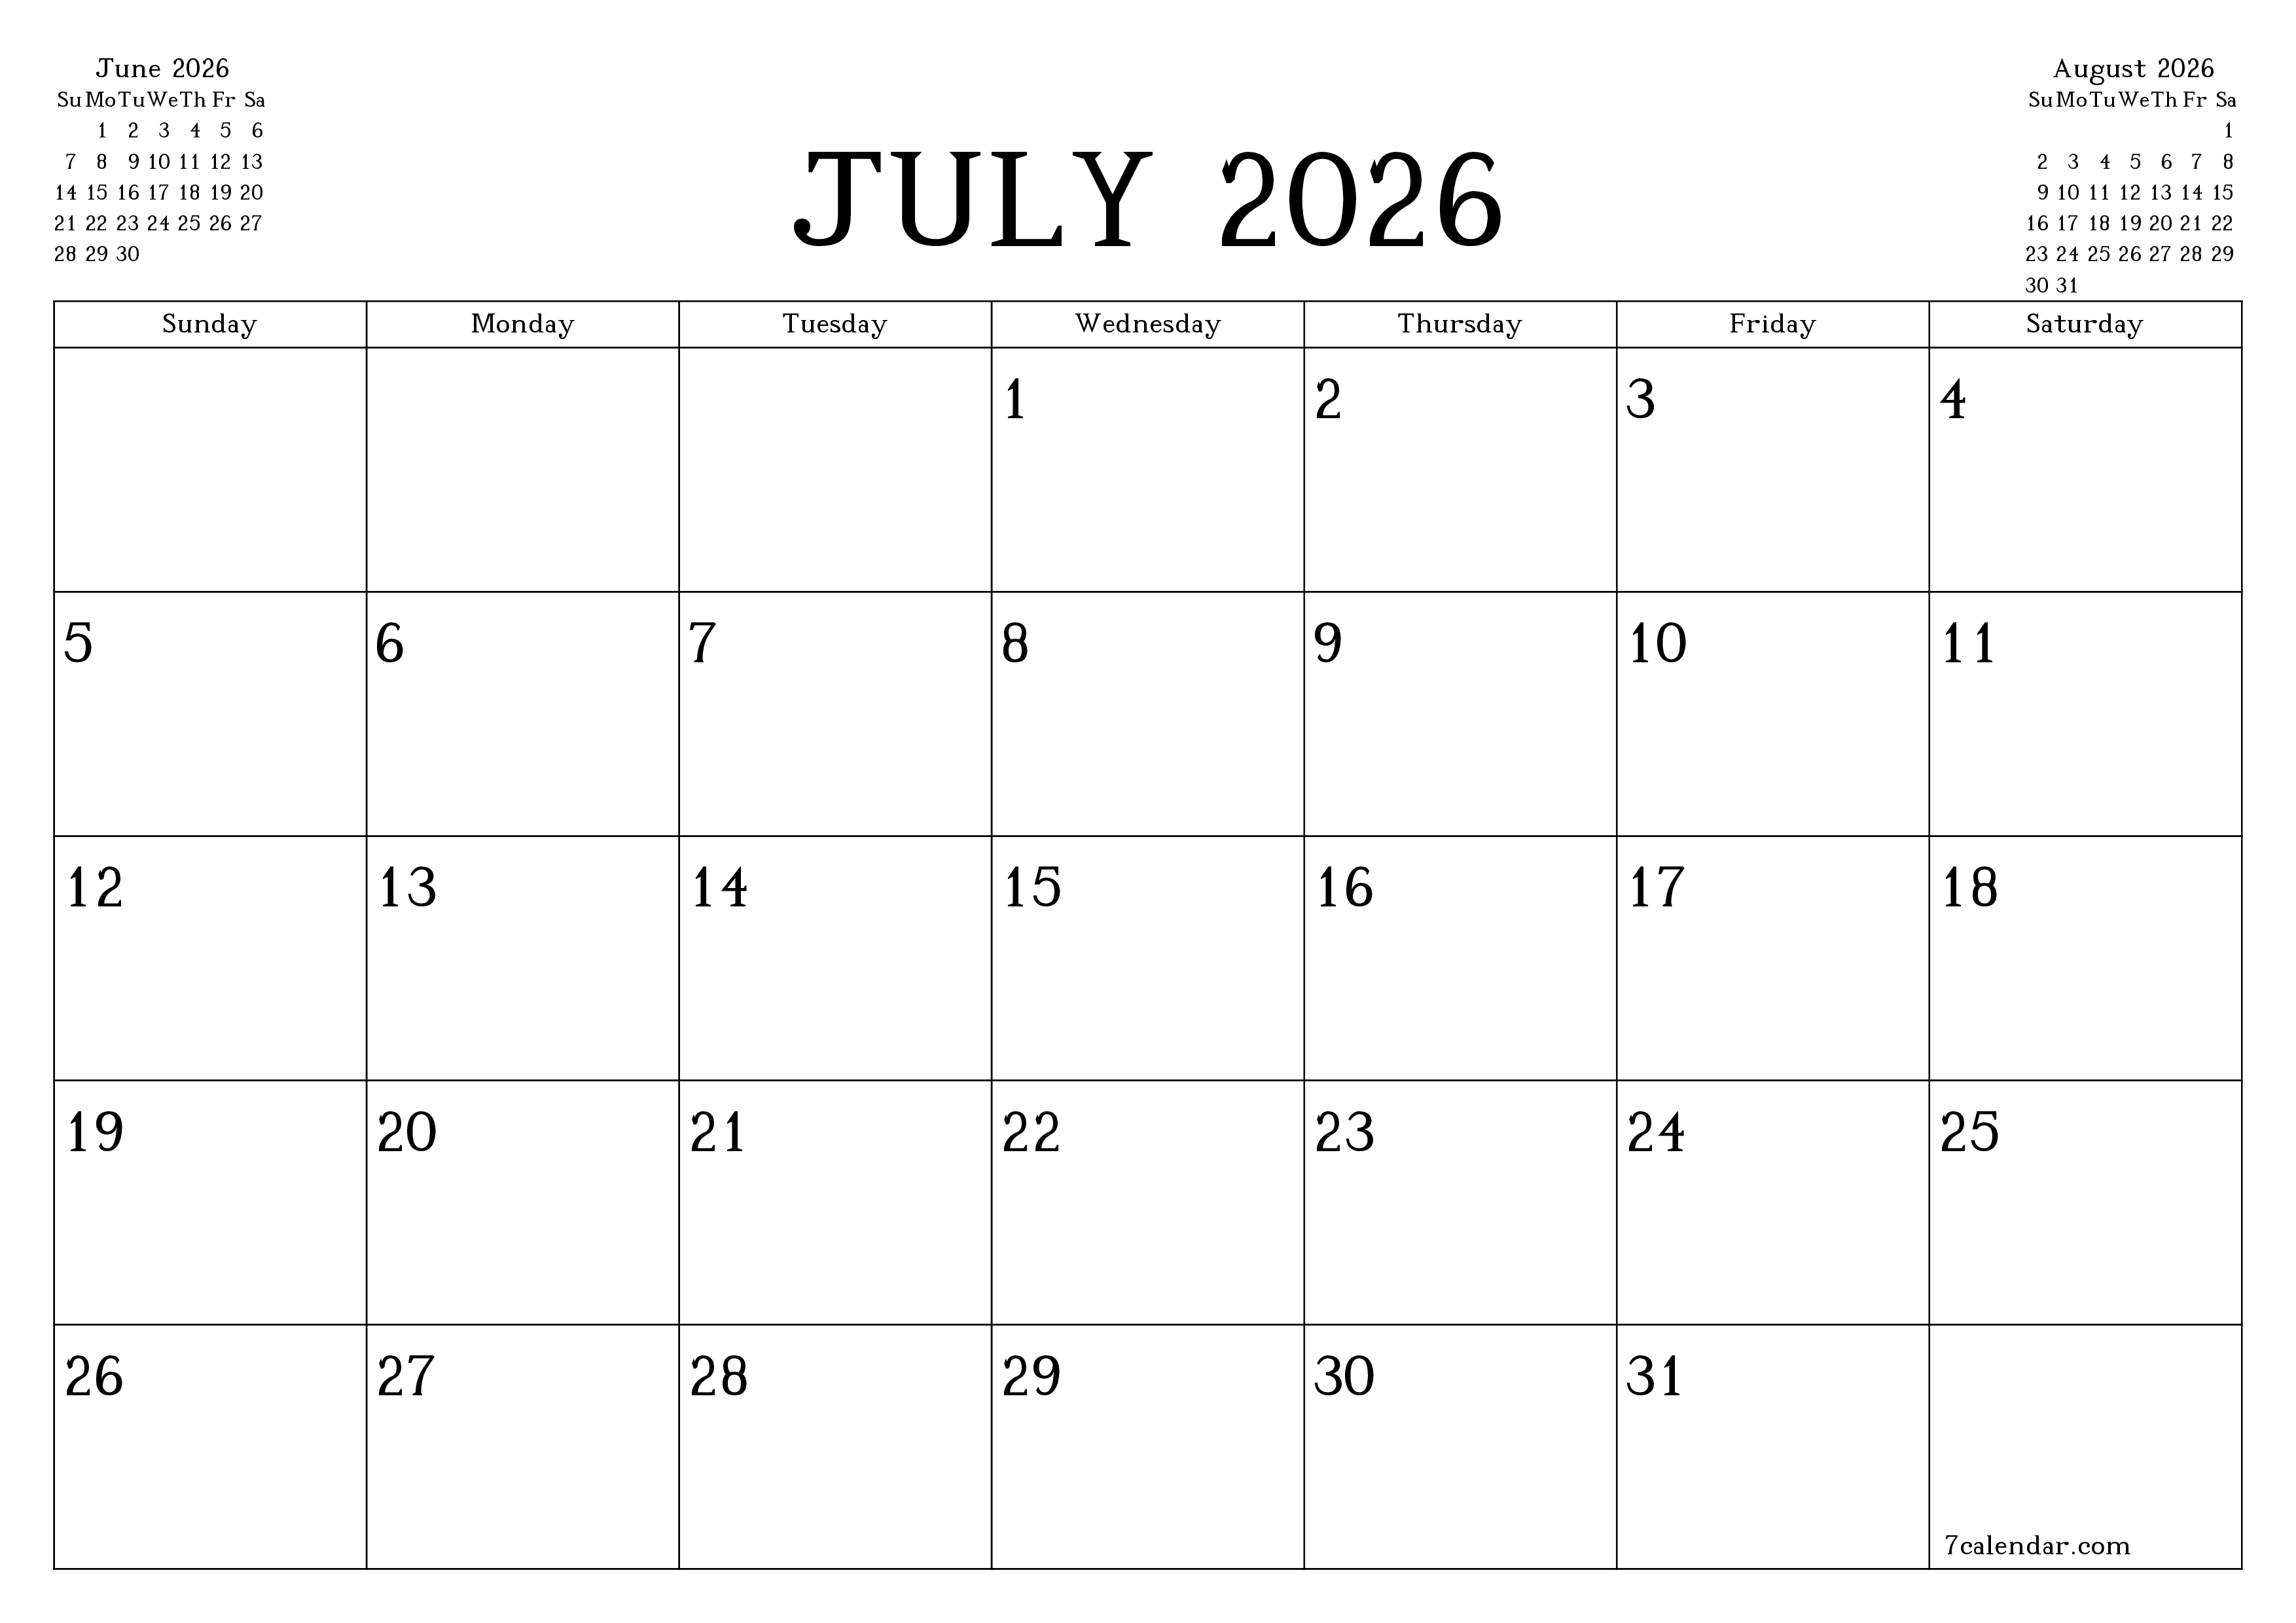 printable wall template free horizontal Monthly planner calendar July (Jul) 2026